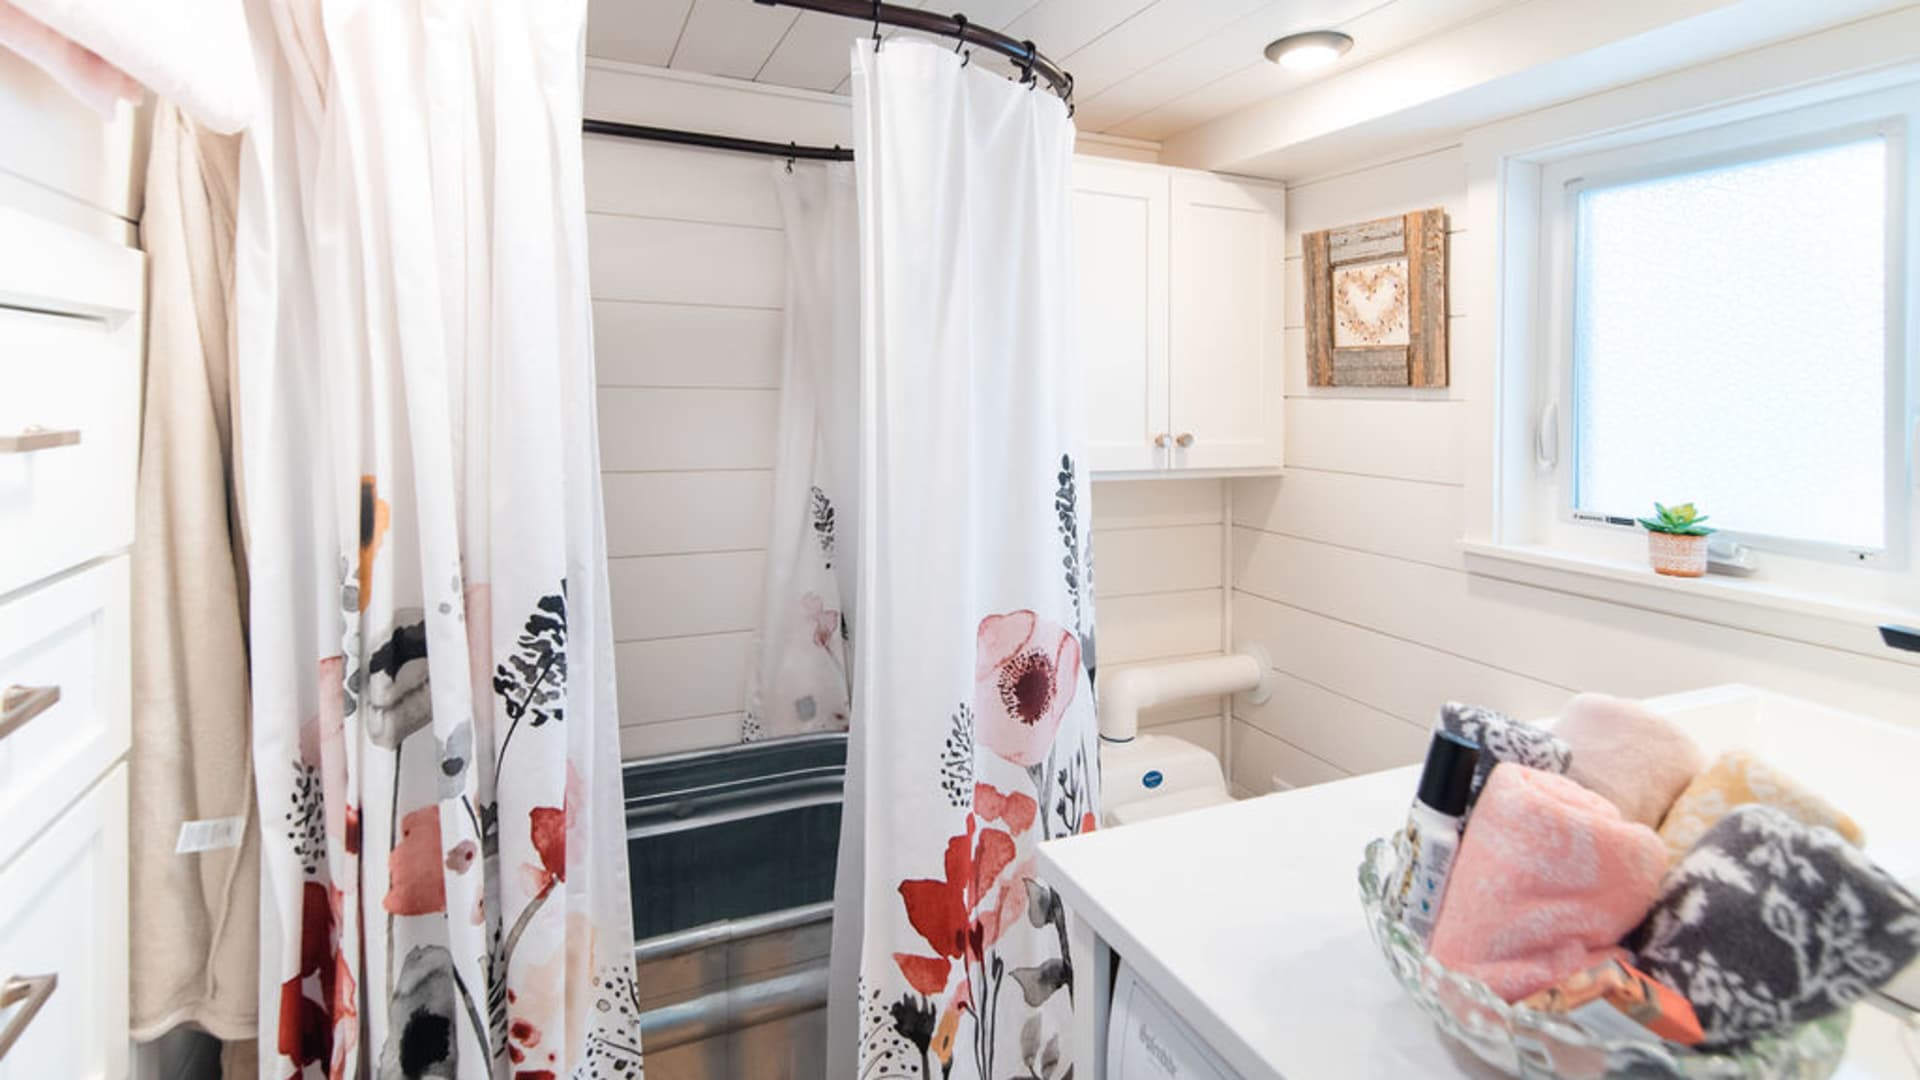 The soaker tub is one of my favorite parts of this tiny home.